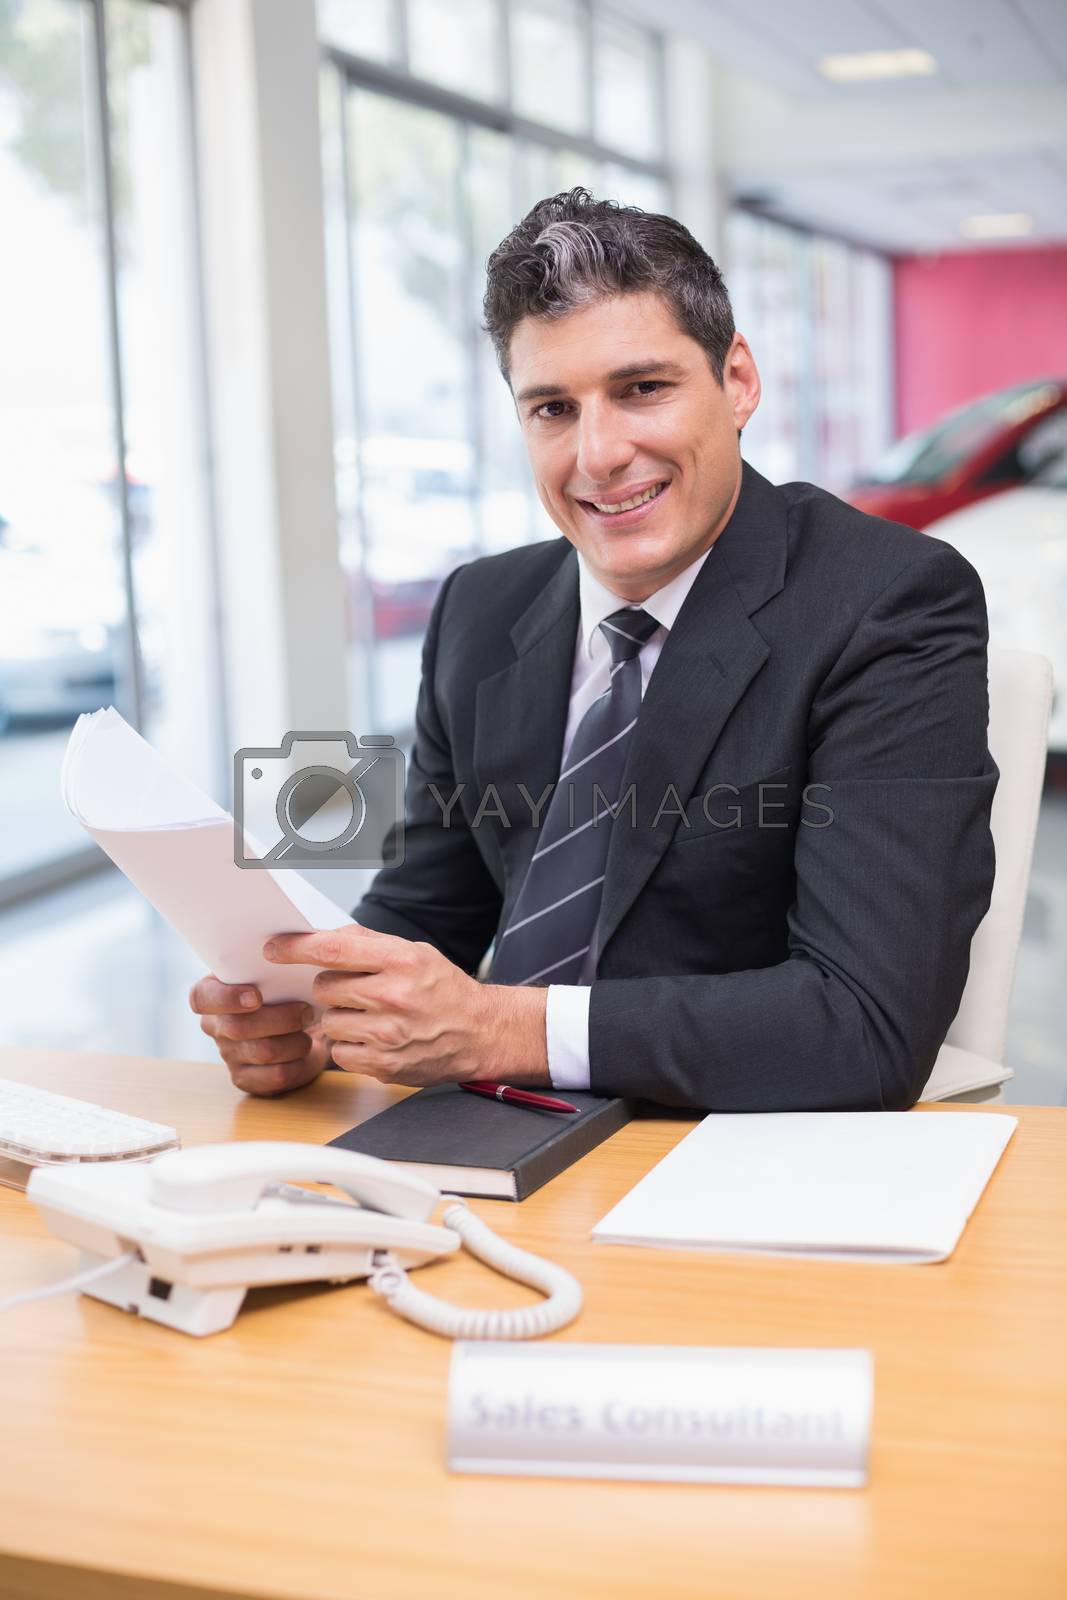 Royalty free image of Smiling salesperson holding a document by Wavebreakmedia